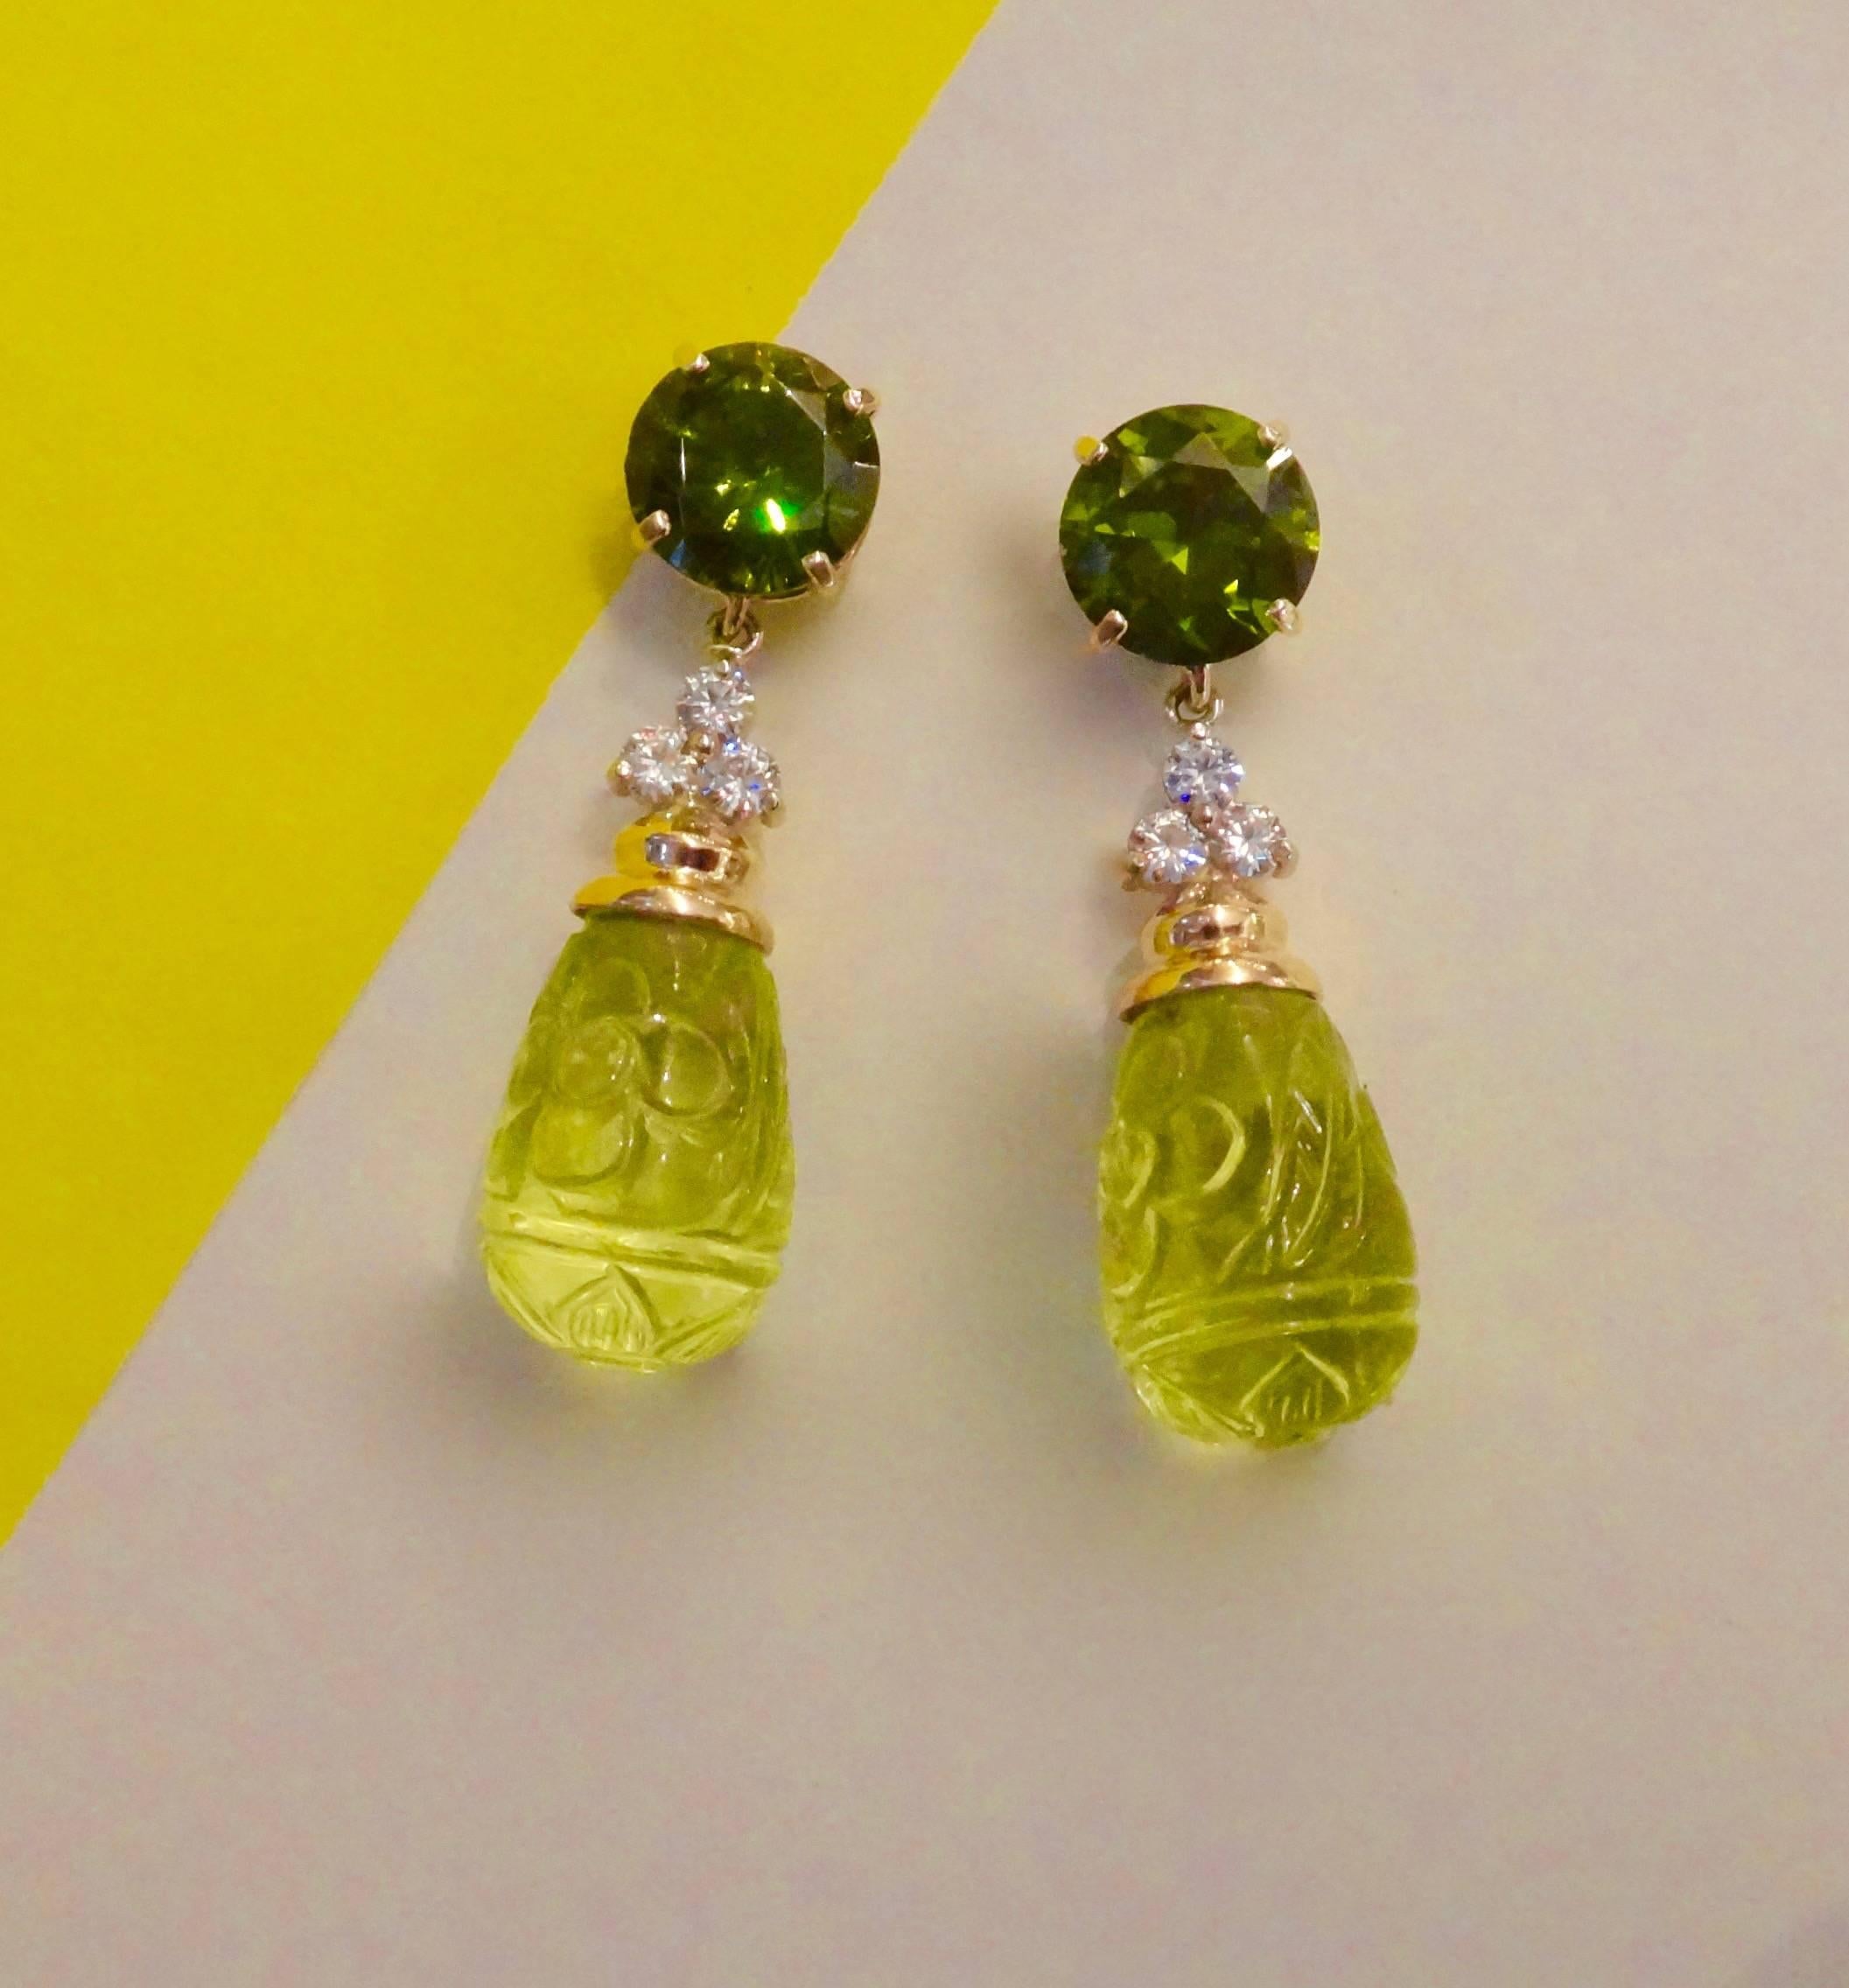 Brilliant cut forest green zircons (origin: Sri Lanka.) are paired with beautifully carved lemon citrine drops with a frosted finish in these dangle earrings.  Zircons occur in various colors including reddish brown, yellow, blue or in this case,